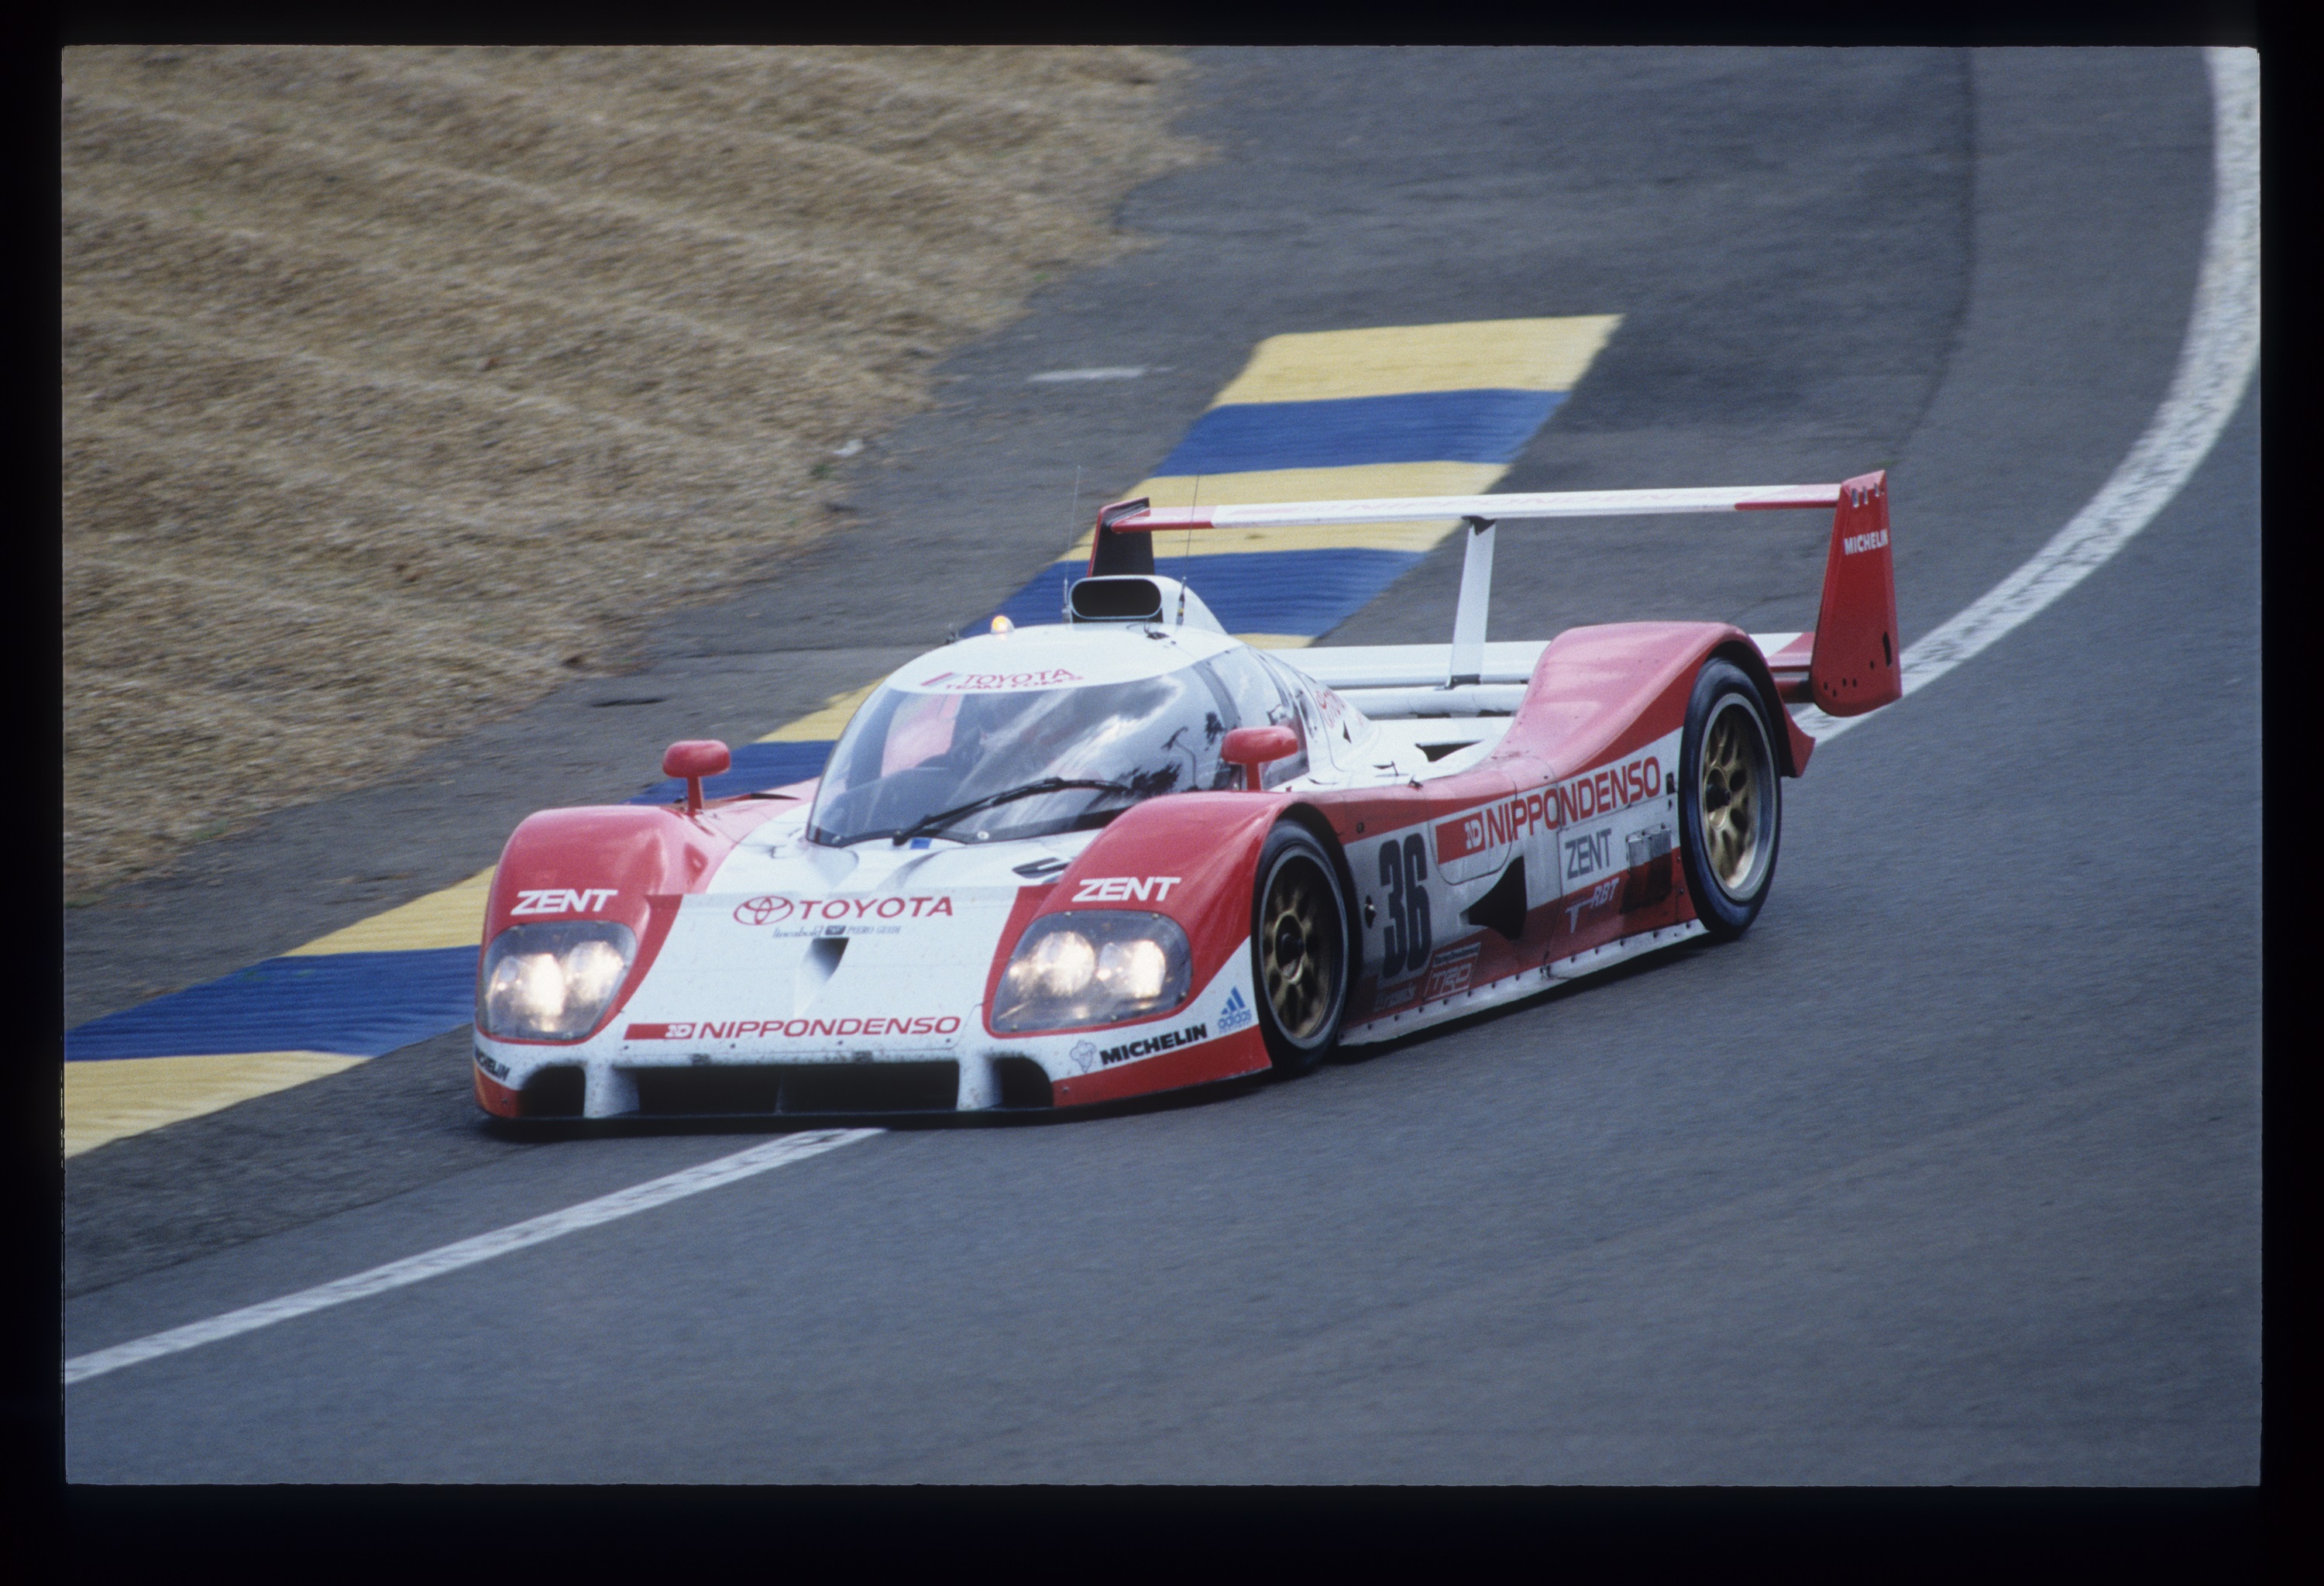 Developing cars as rapid as a Formula One was so costly that a lack of competitors brought the World and Japanese championships to an end in 1992. These TS010s could therefore only be seen at the 24 Hours of Le Mans.